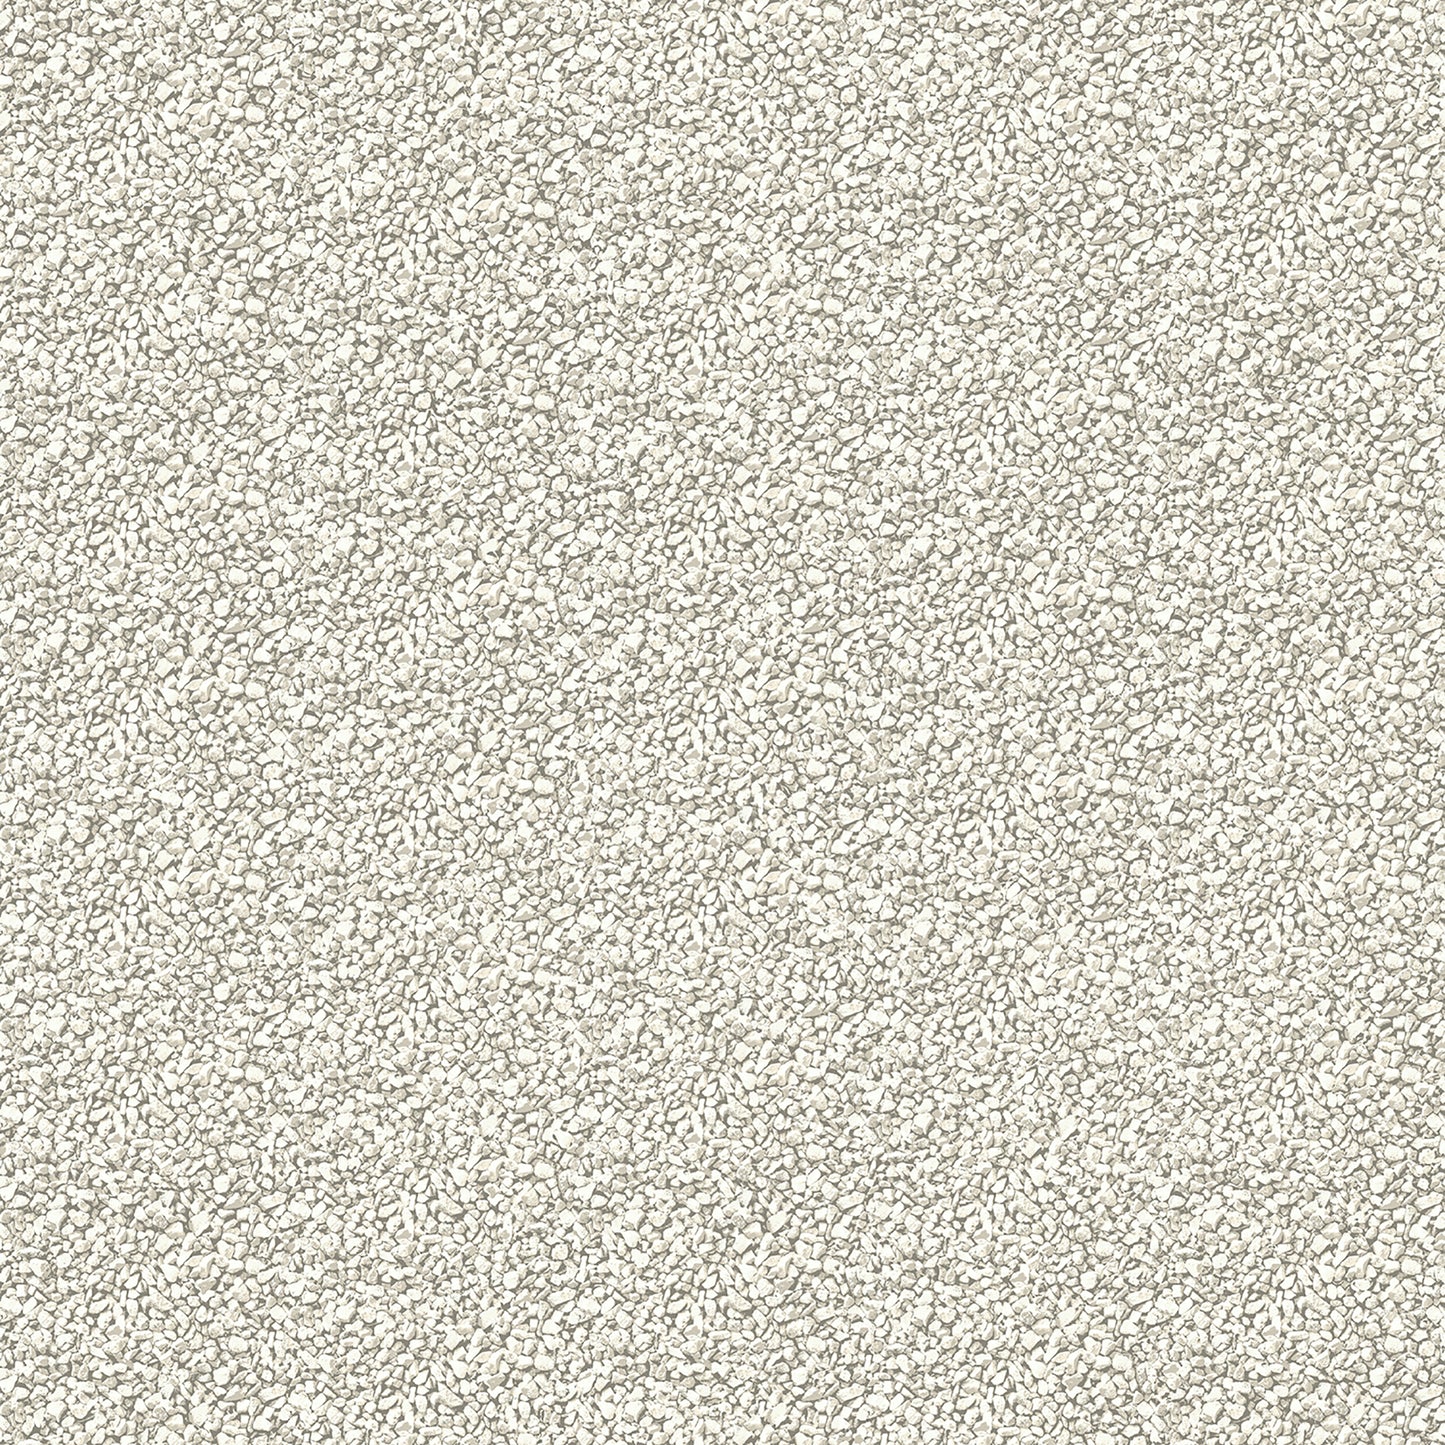 Shop 4020-08307 Geo & Textures Poe Taupe Pebble Taupe by Advantage